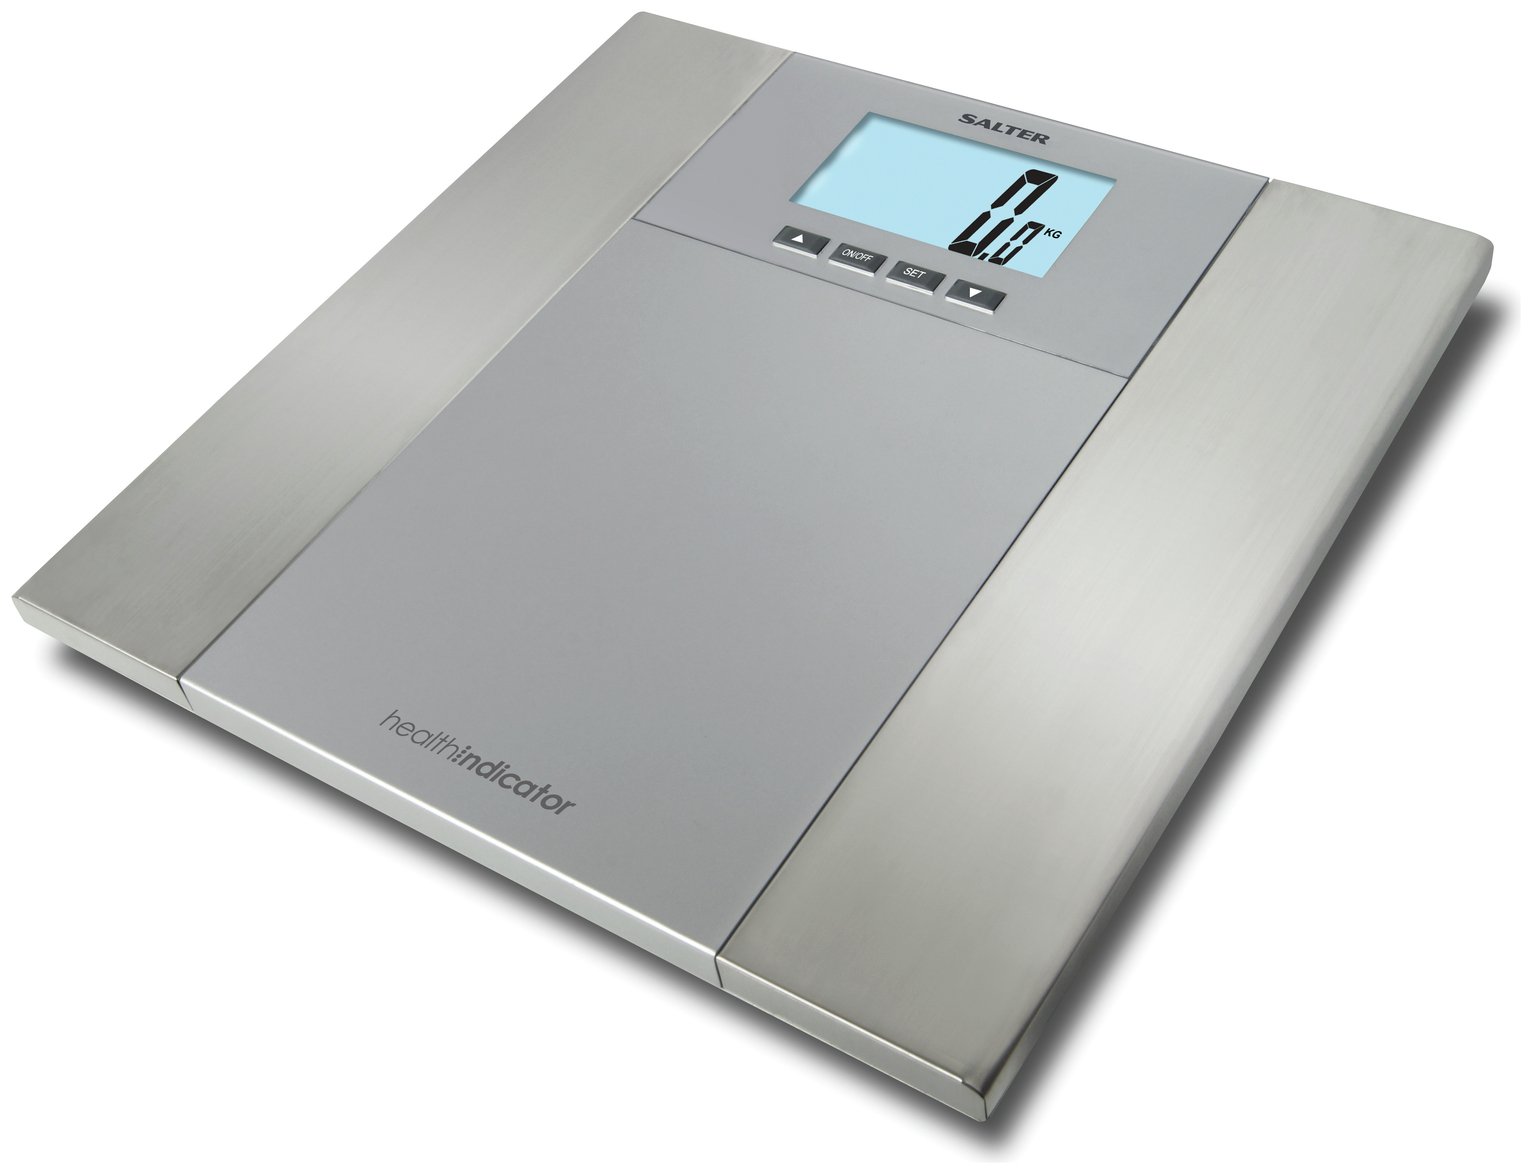 Salter Health Indicator Body Analyser Scale - Silver